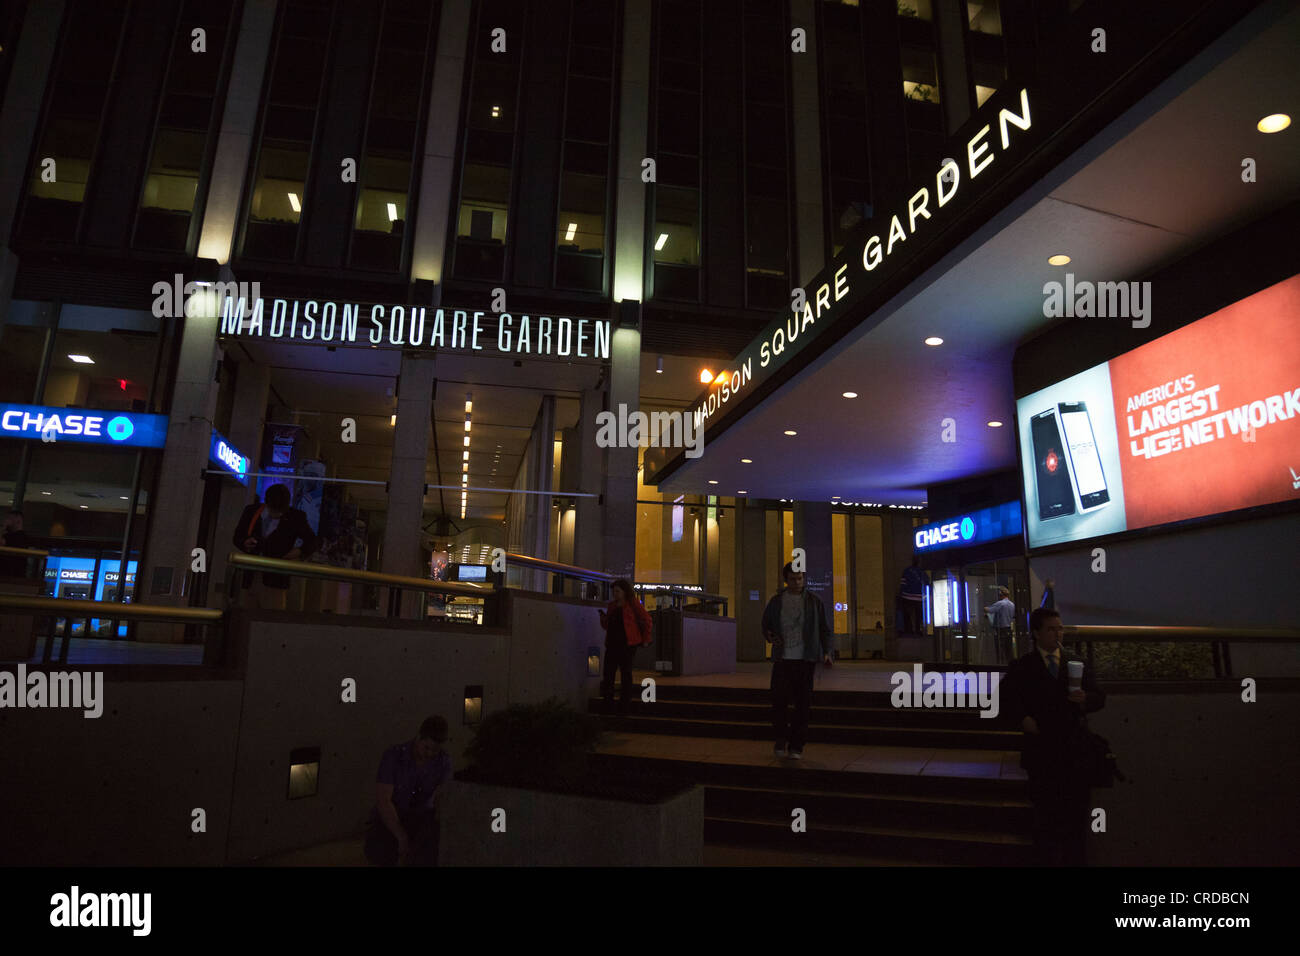 Madison square garden entrance hi-res stock photography and images - Alamy